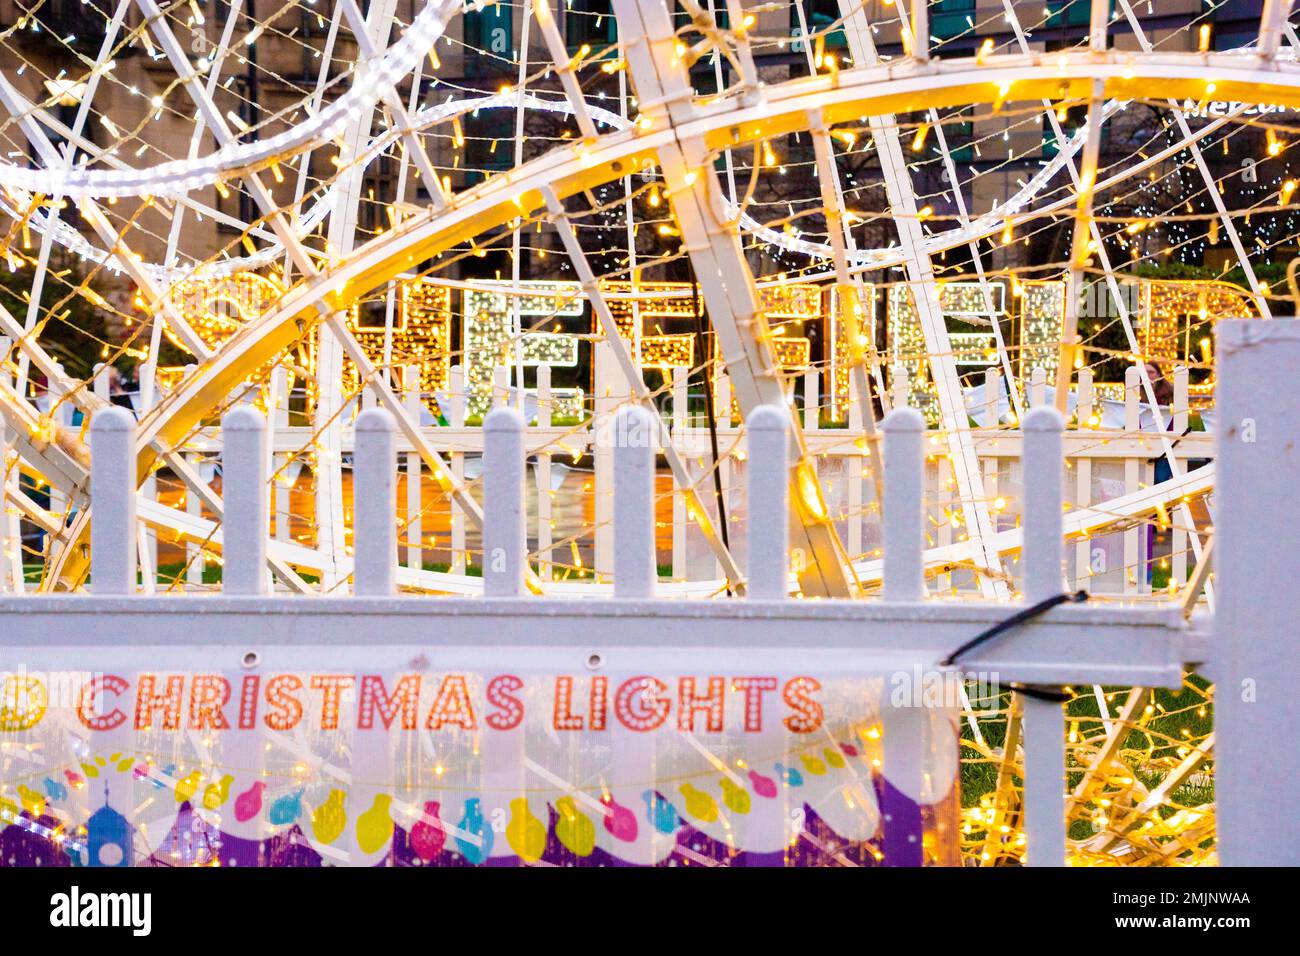 Yorkshire, UK – 21 Dec 2020: Sheffield lit up: close up on the Christmas illuminations at the Peace Gardens Stock Photo